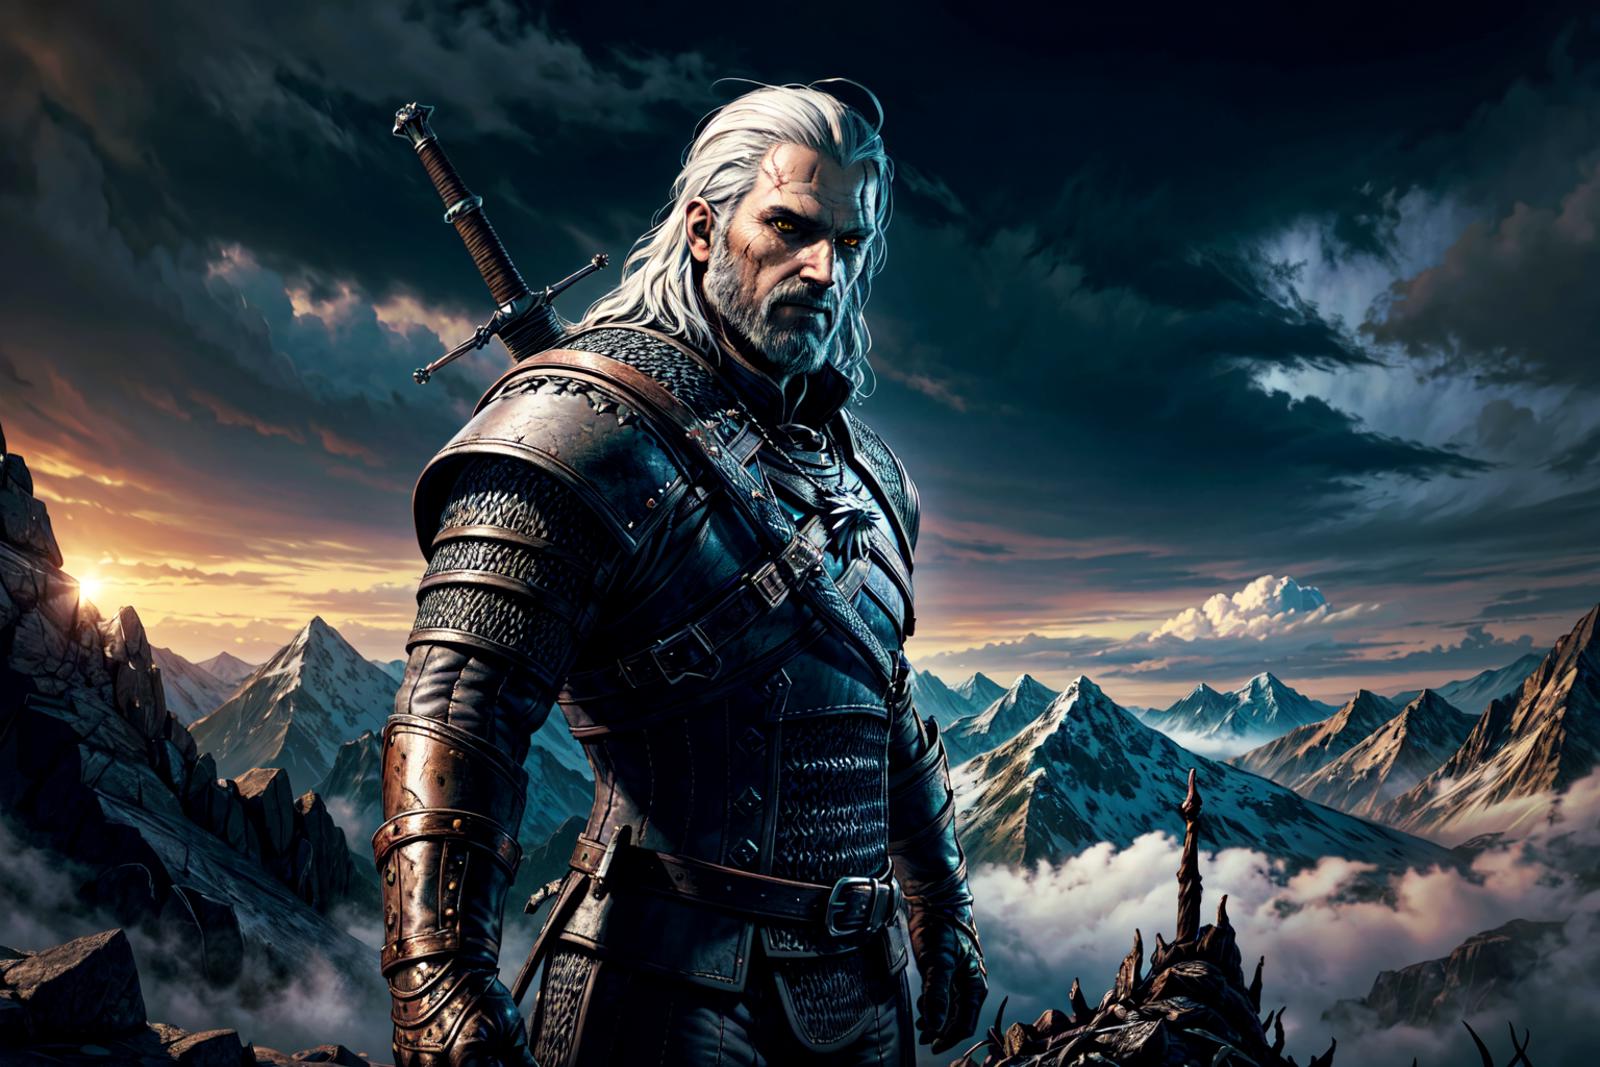 Geralt of Rivia  |  The Witcher 3 : Wild Hunt image by Kayako